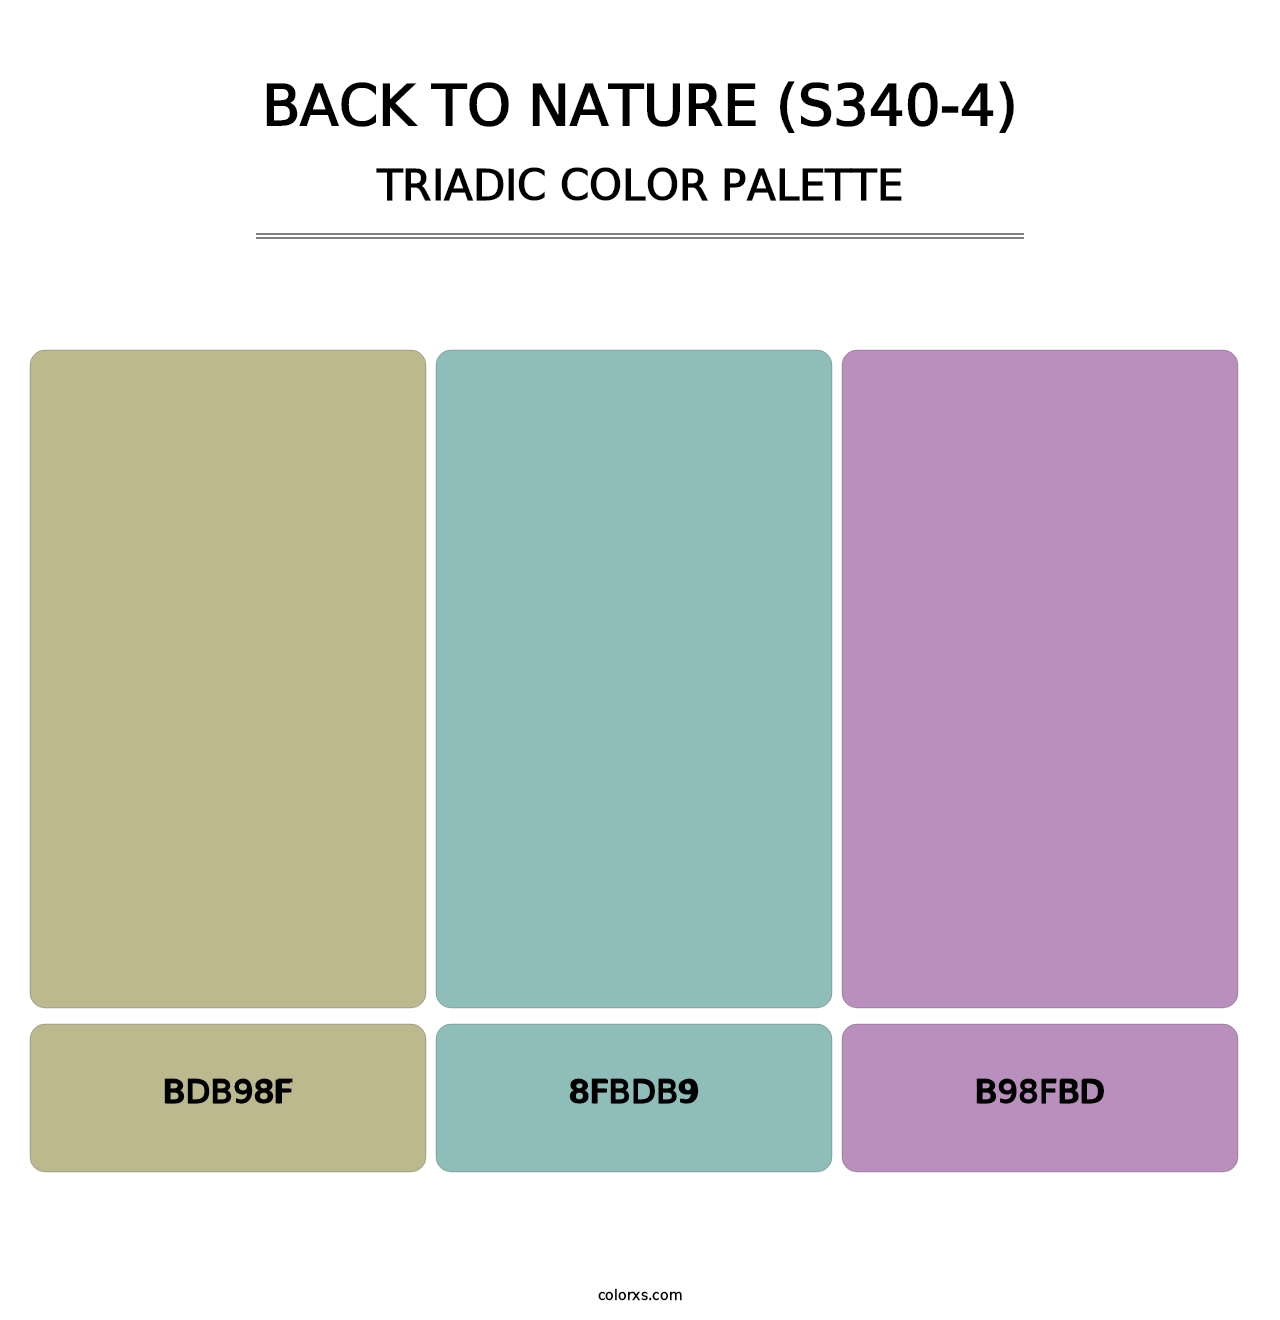 Back To Nature (S340-4) - Triadic Color Palette